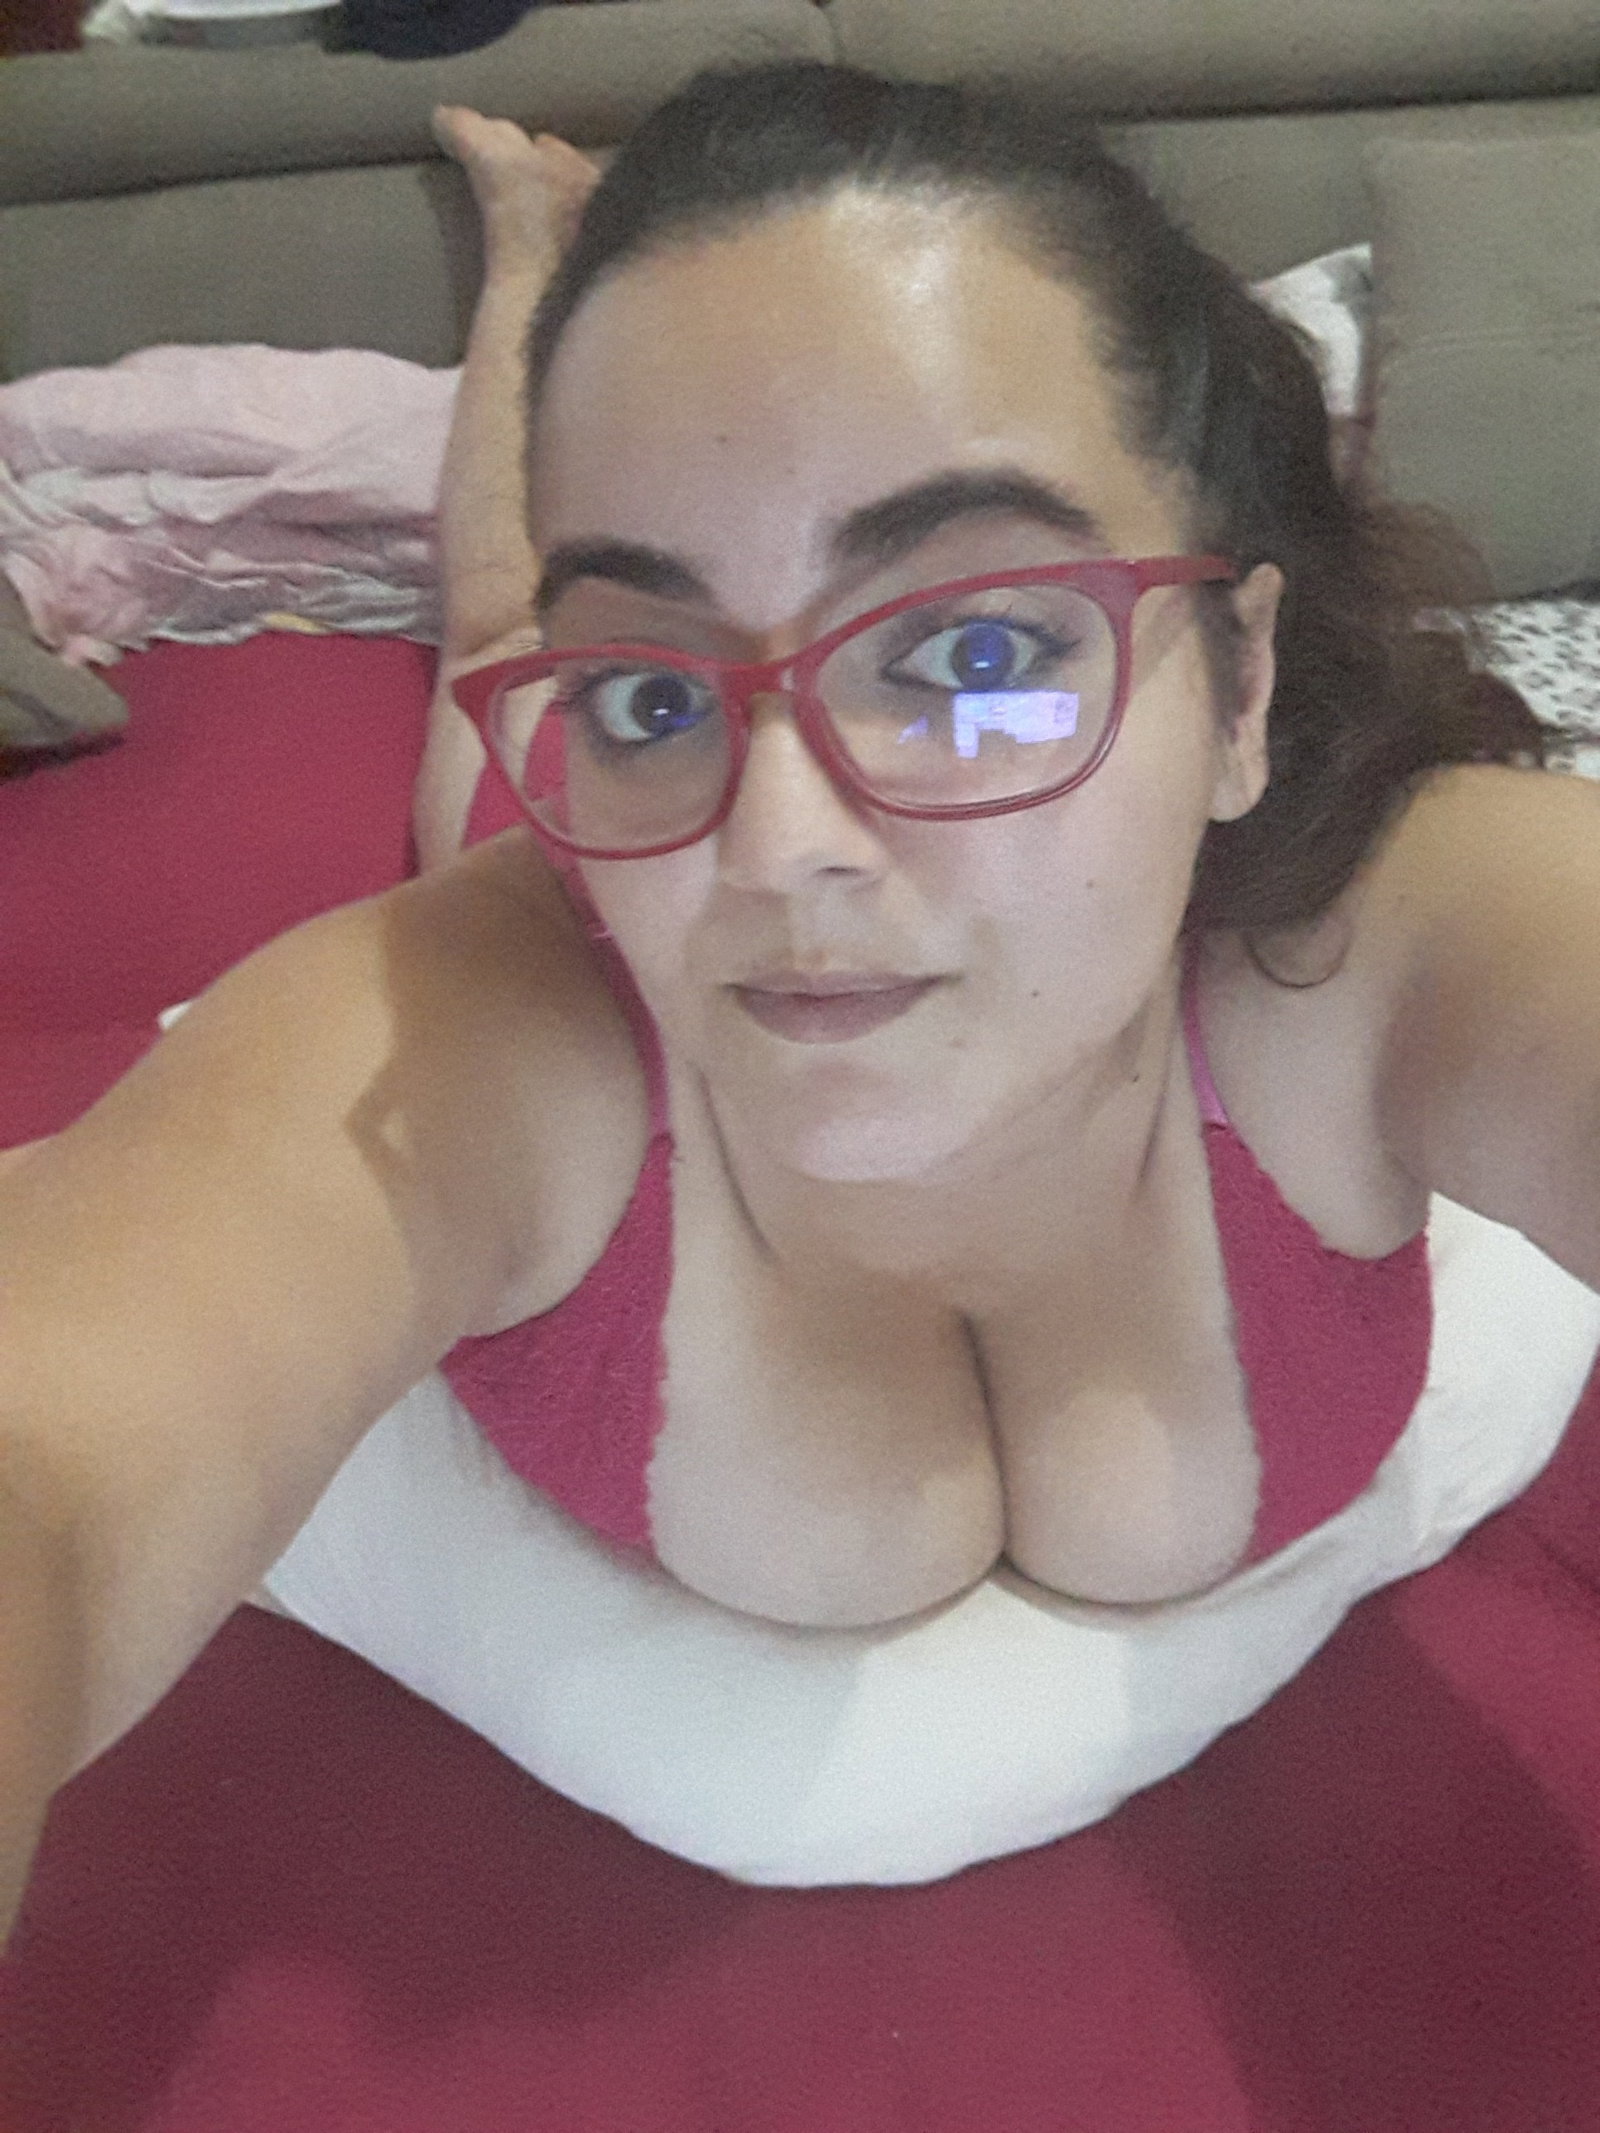 Watch the Photo by BustyVonKat with the username @BustyVonKat, who is a star user, posted on January 6, 2019 and the text says 'Join me on chaturbate.com/b/sluttynerd27'